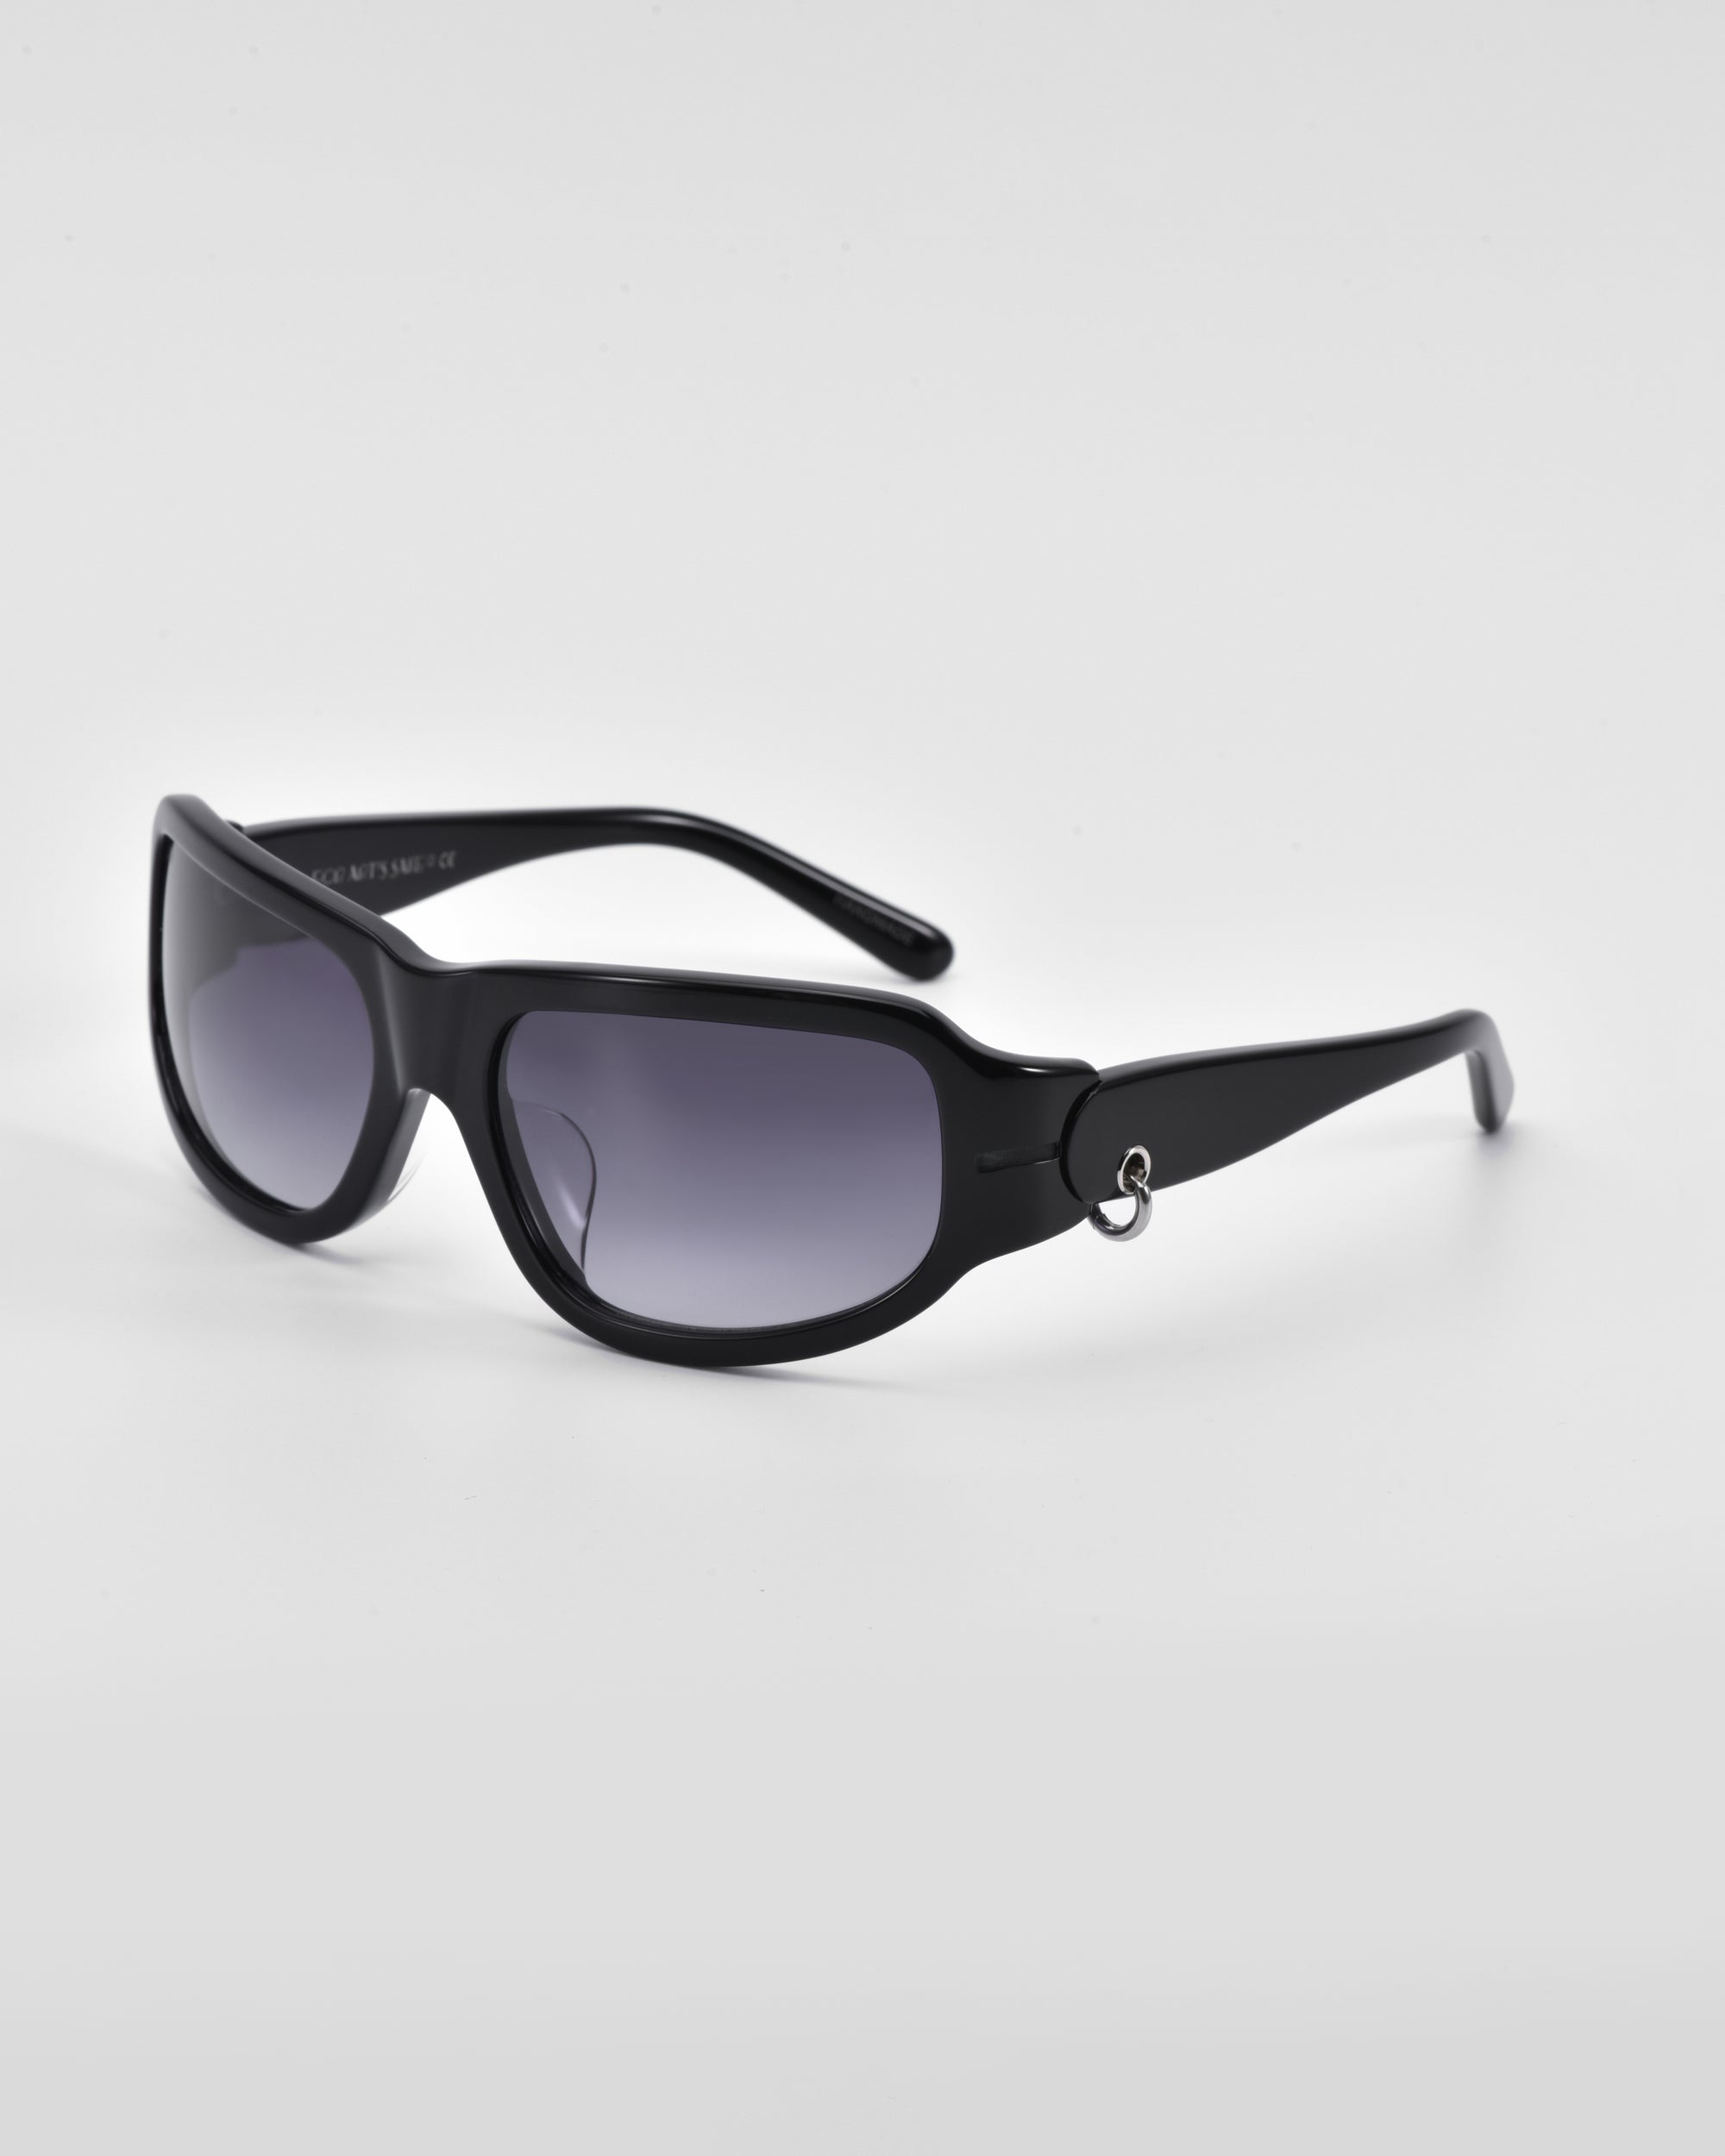 A pair of sleek For Art&#39;s Sake® Raven sunglasses with dark tinted lenses set against a plain white background. The sunglasses feature a simple, modern design with slightly curved arms and a small metallic 18-karat gold detail near the hinges.